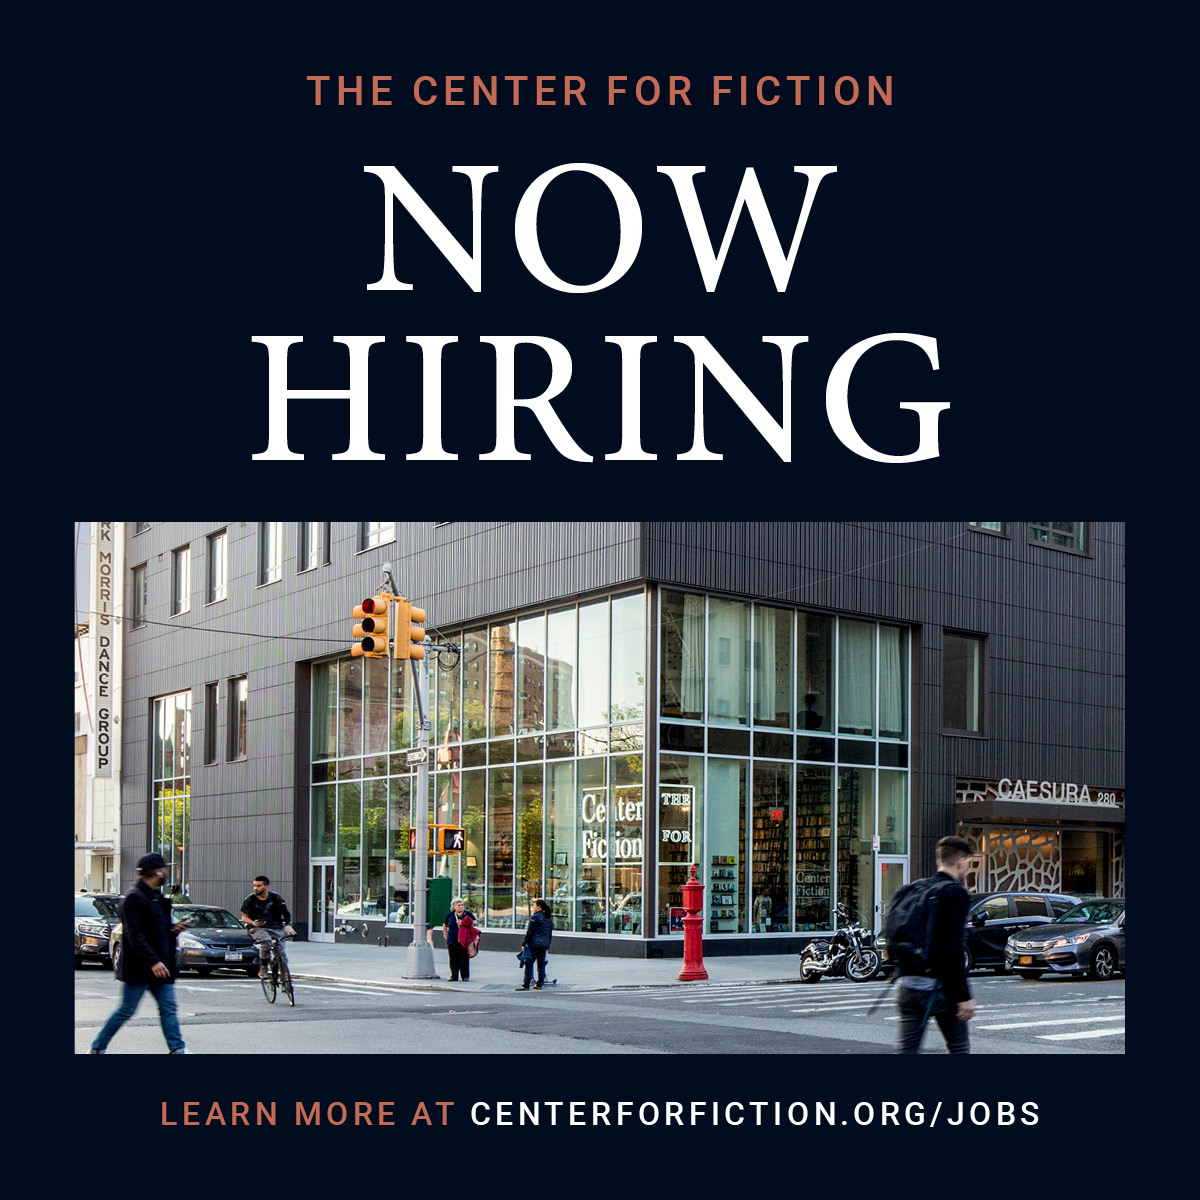 Are you looking to get your start in nonprofits? We're hiring an entry-level Development Assistant! Support the Director of Development in raising essential funds to help run The Center for Fiction’s programs. Learn more about the position here: centerforfiction.org/jobs